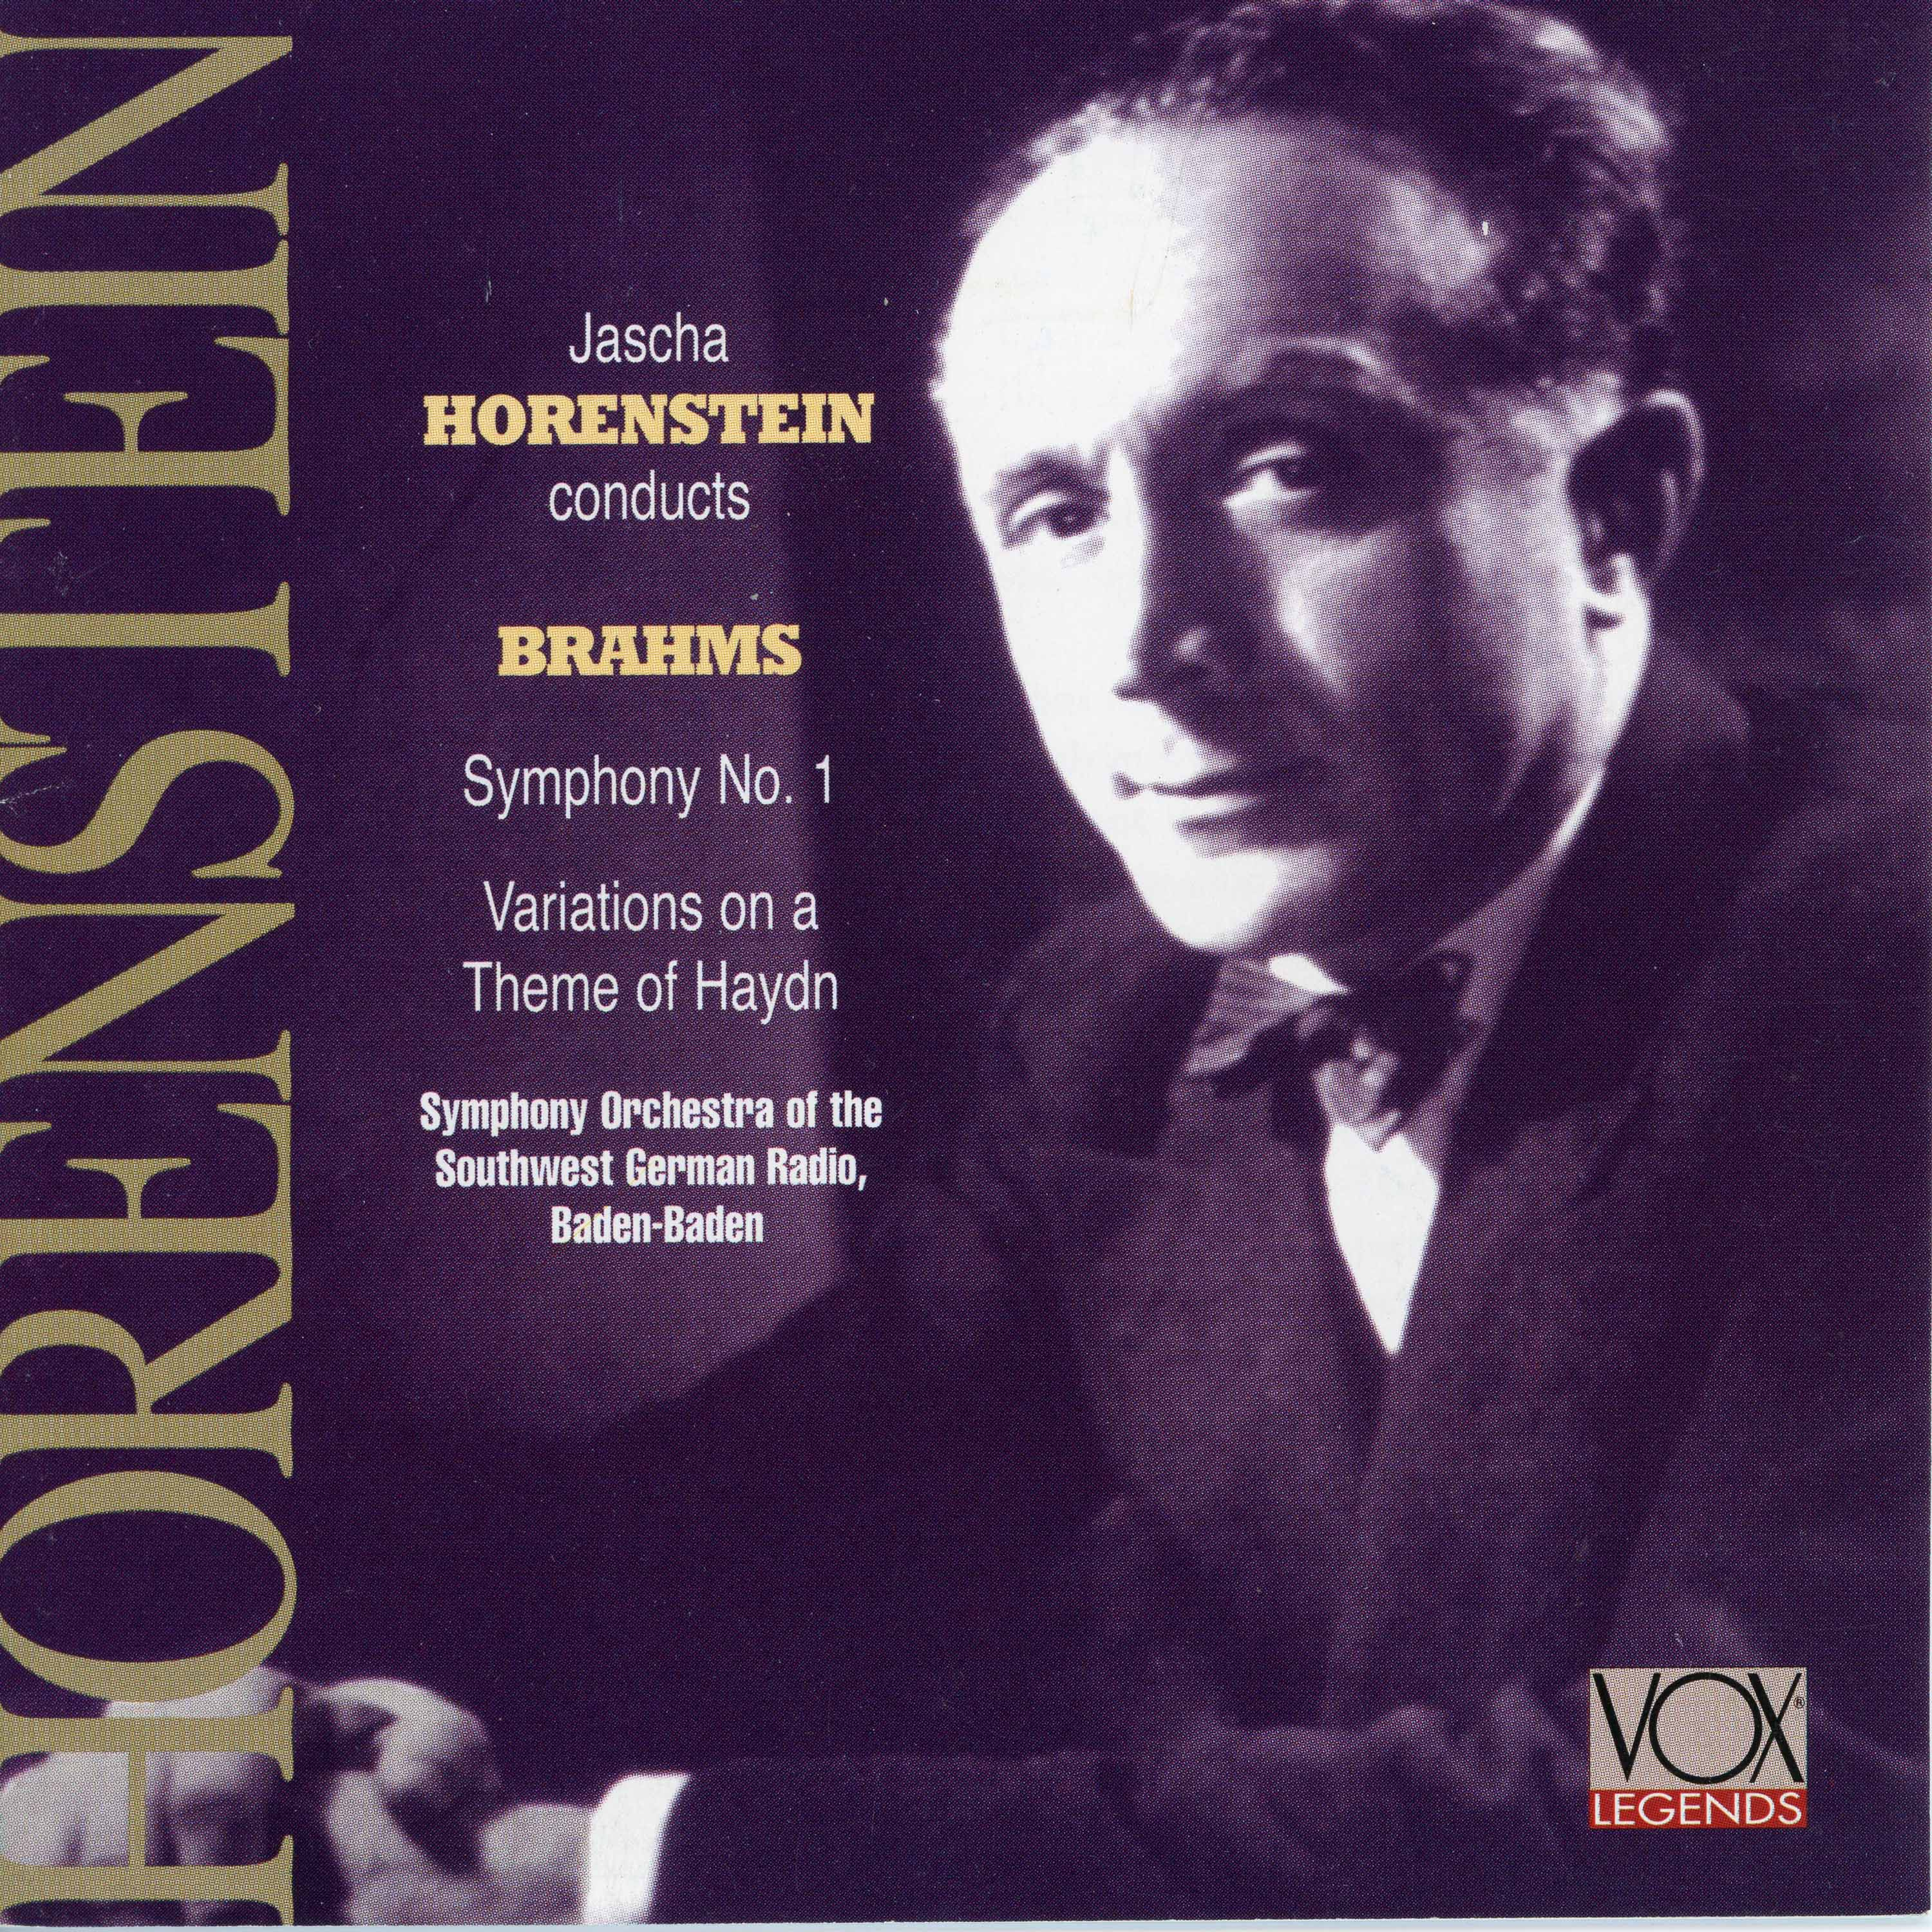 Variations on a Theme by Haydn, Op. 56a "St. Anthony Variations":Variations on a Theme by Haydn, Op. 56a "St. Anthony Variations": Var. 3, Con moto